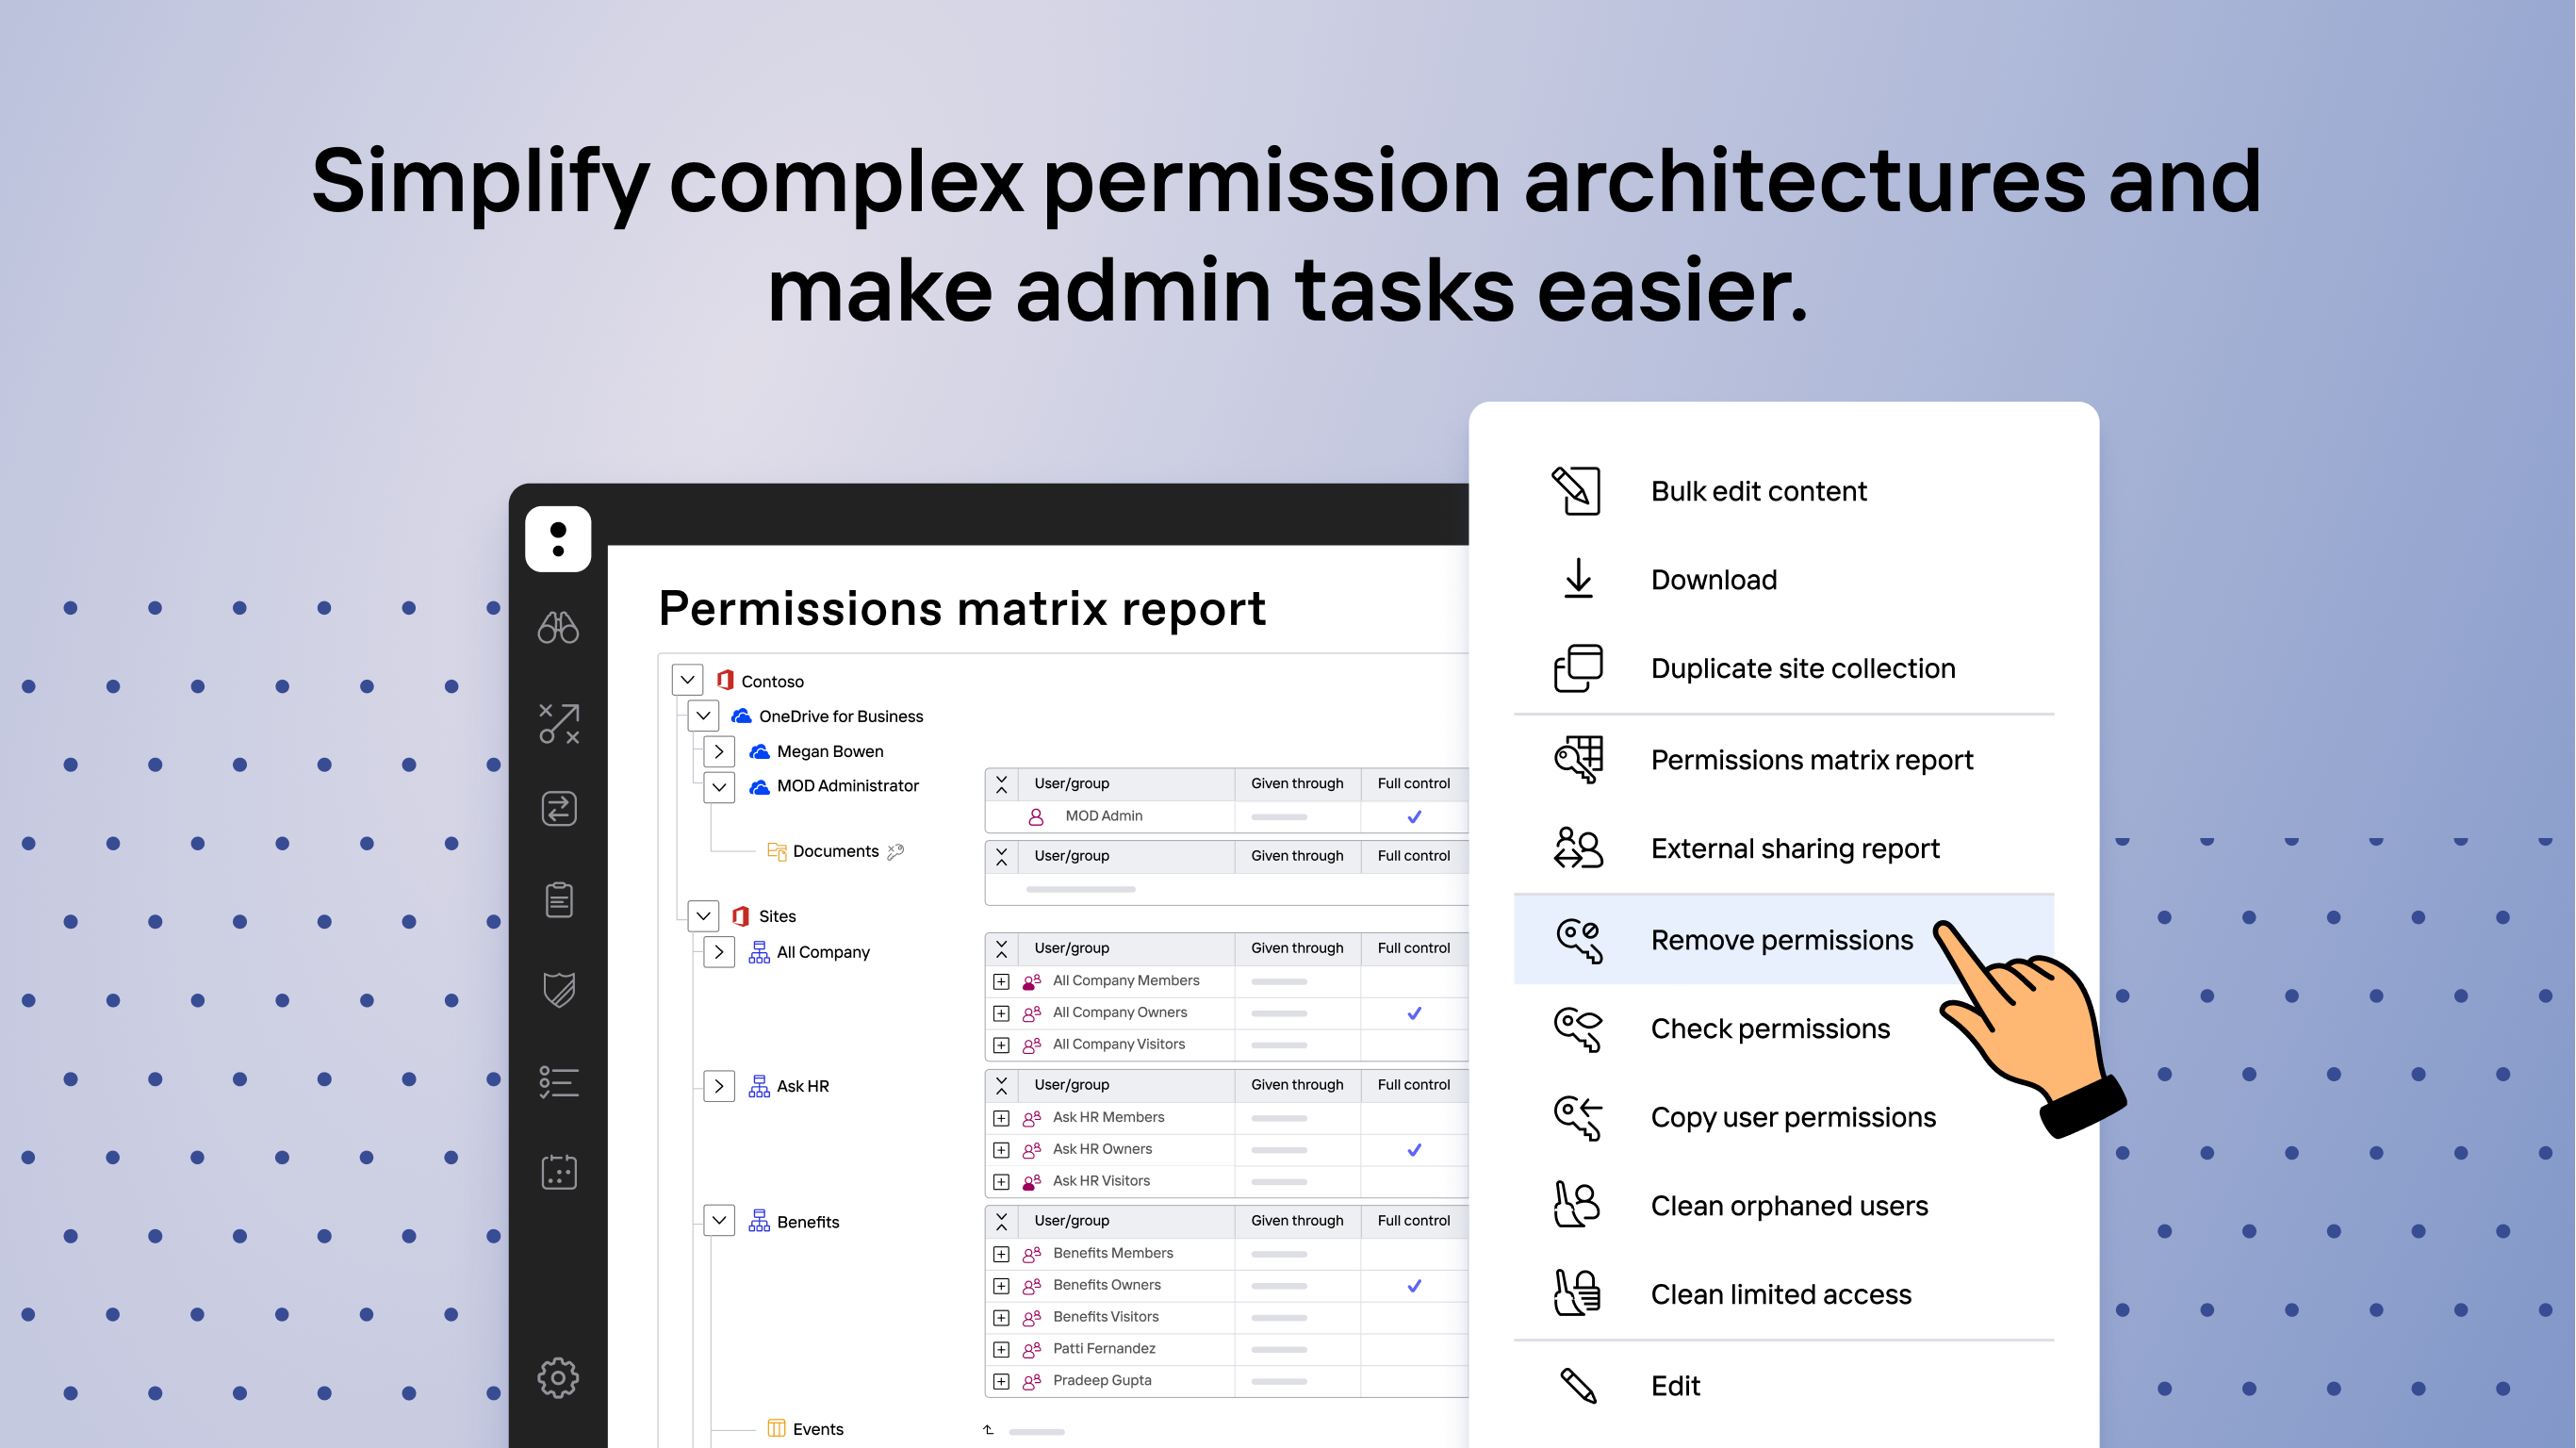 Simplify complex permission architectures and make admin tasks easier. 